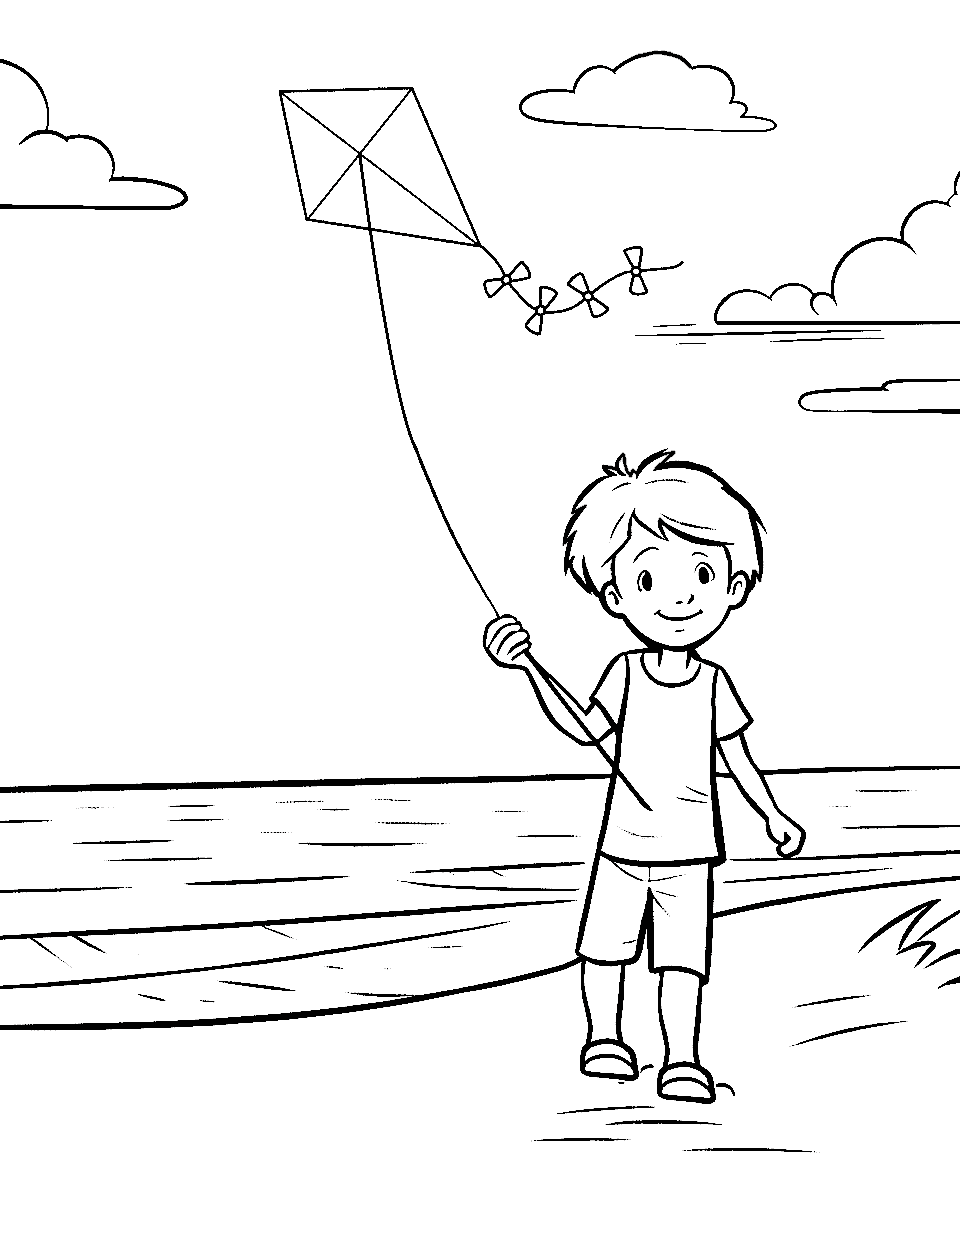 Boy with a Kite Coloring Page - A young boy happily running with a colorful kite soaring in the sky above.